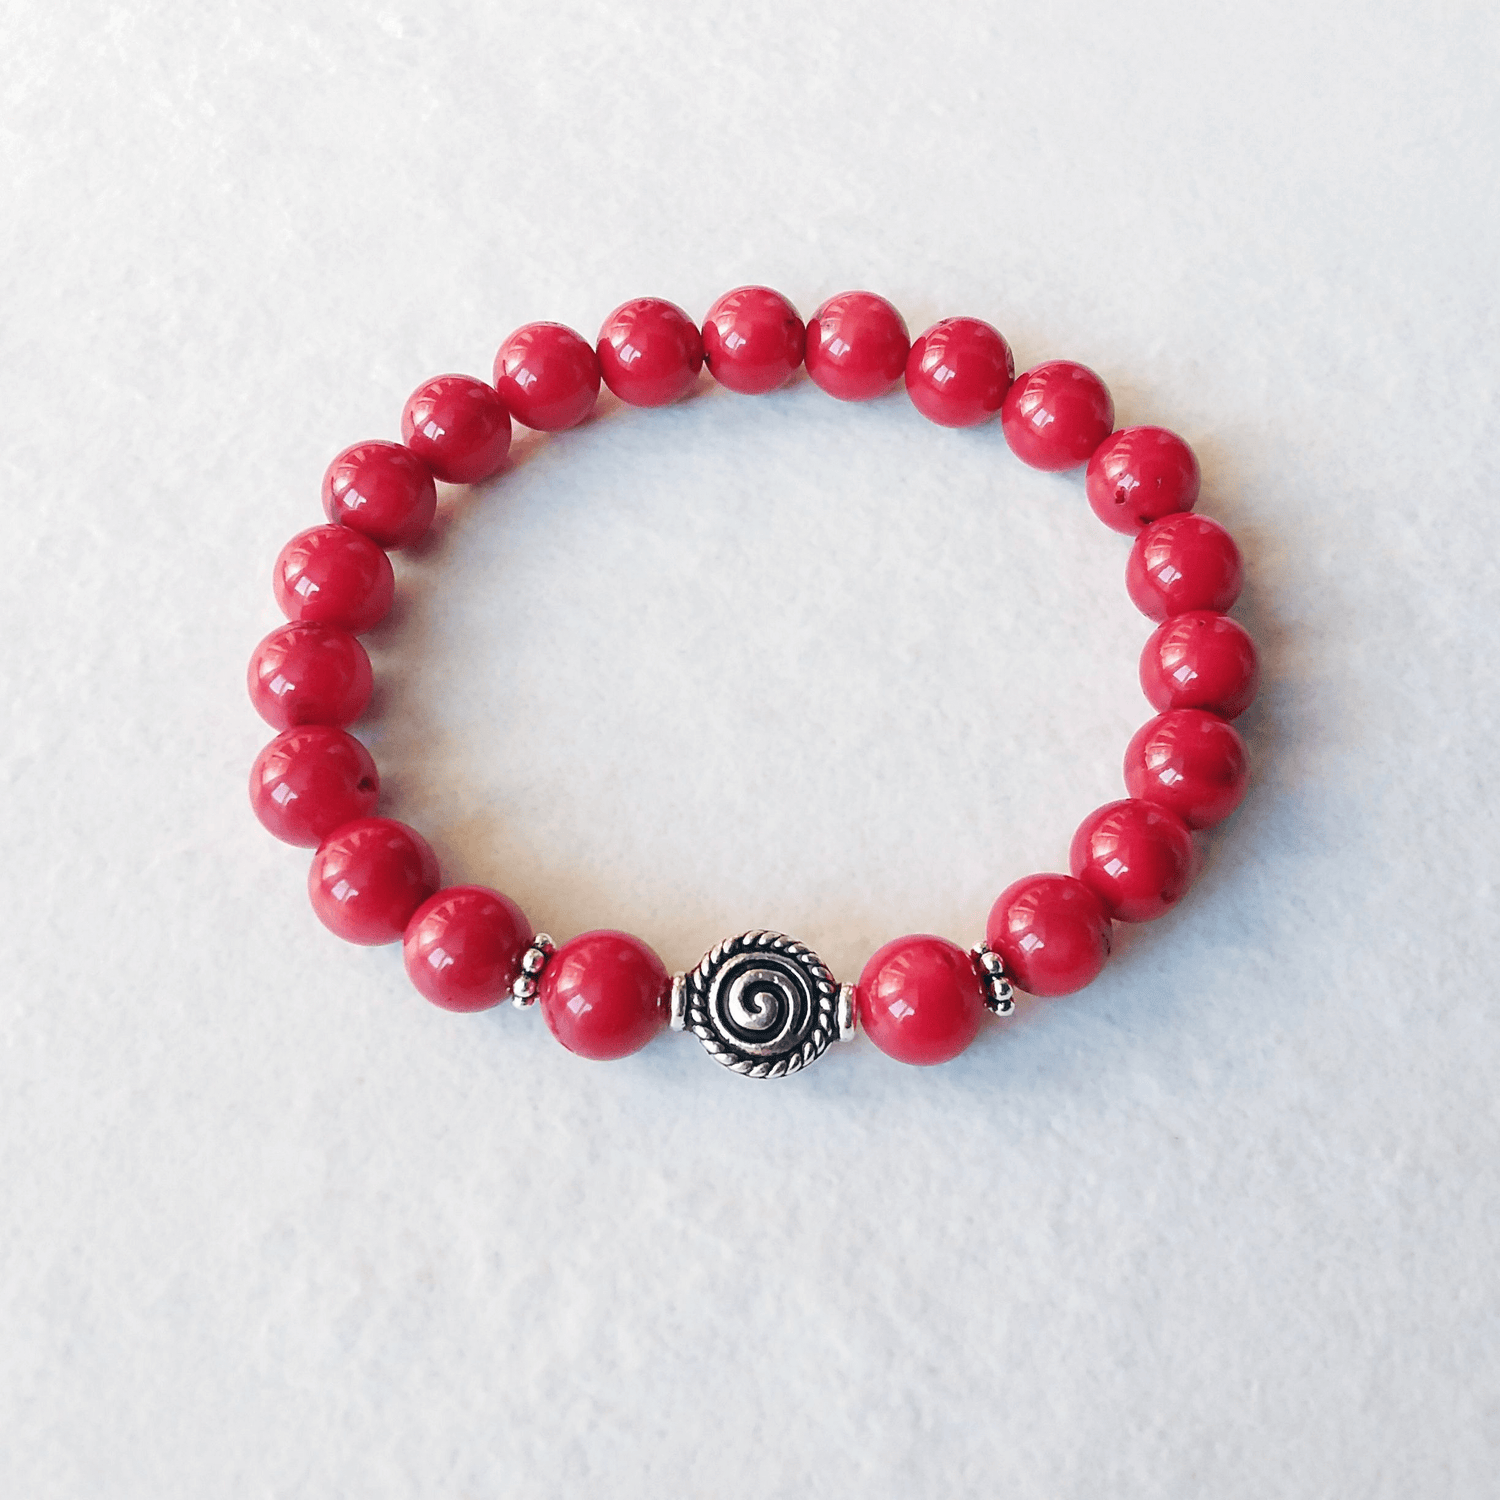 Red Sea Bamboo Stretch Bracelet with Spiral Bead